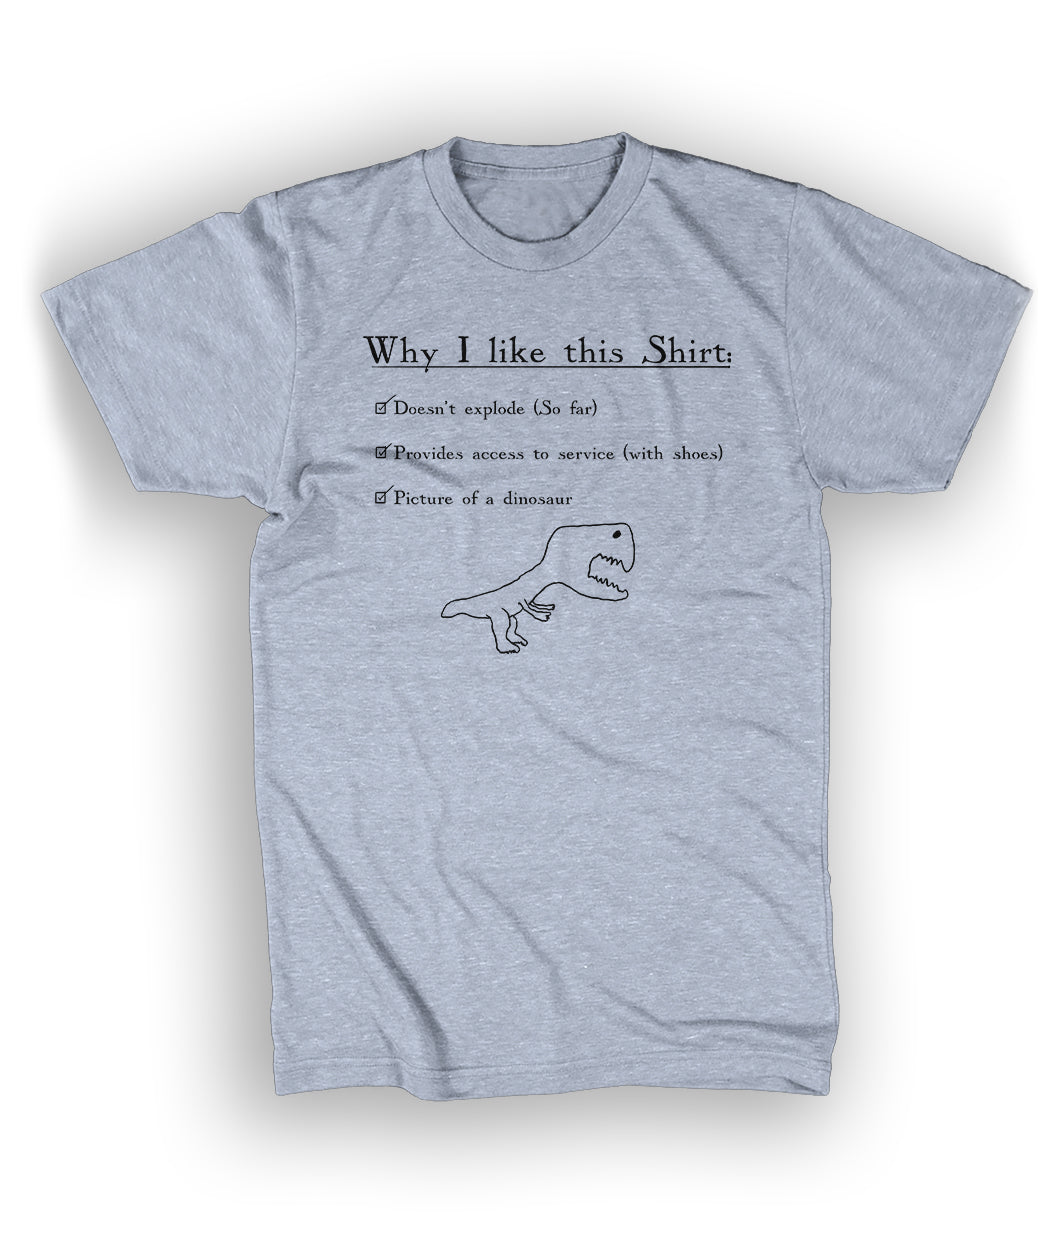 A gray t-shirt with black serif text on it in the center of the shirt reading “Why I like this Shirt” at the top. Underneath, a bullet point list says, 